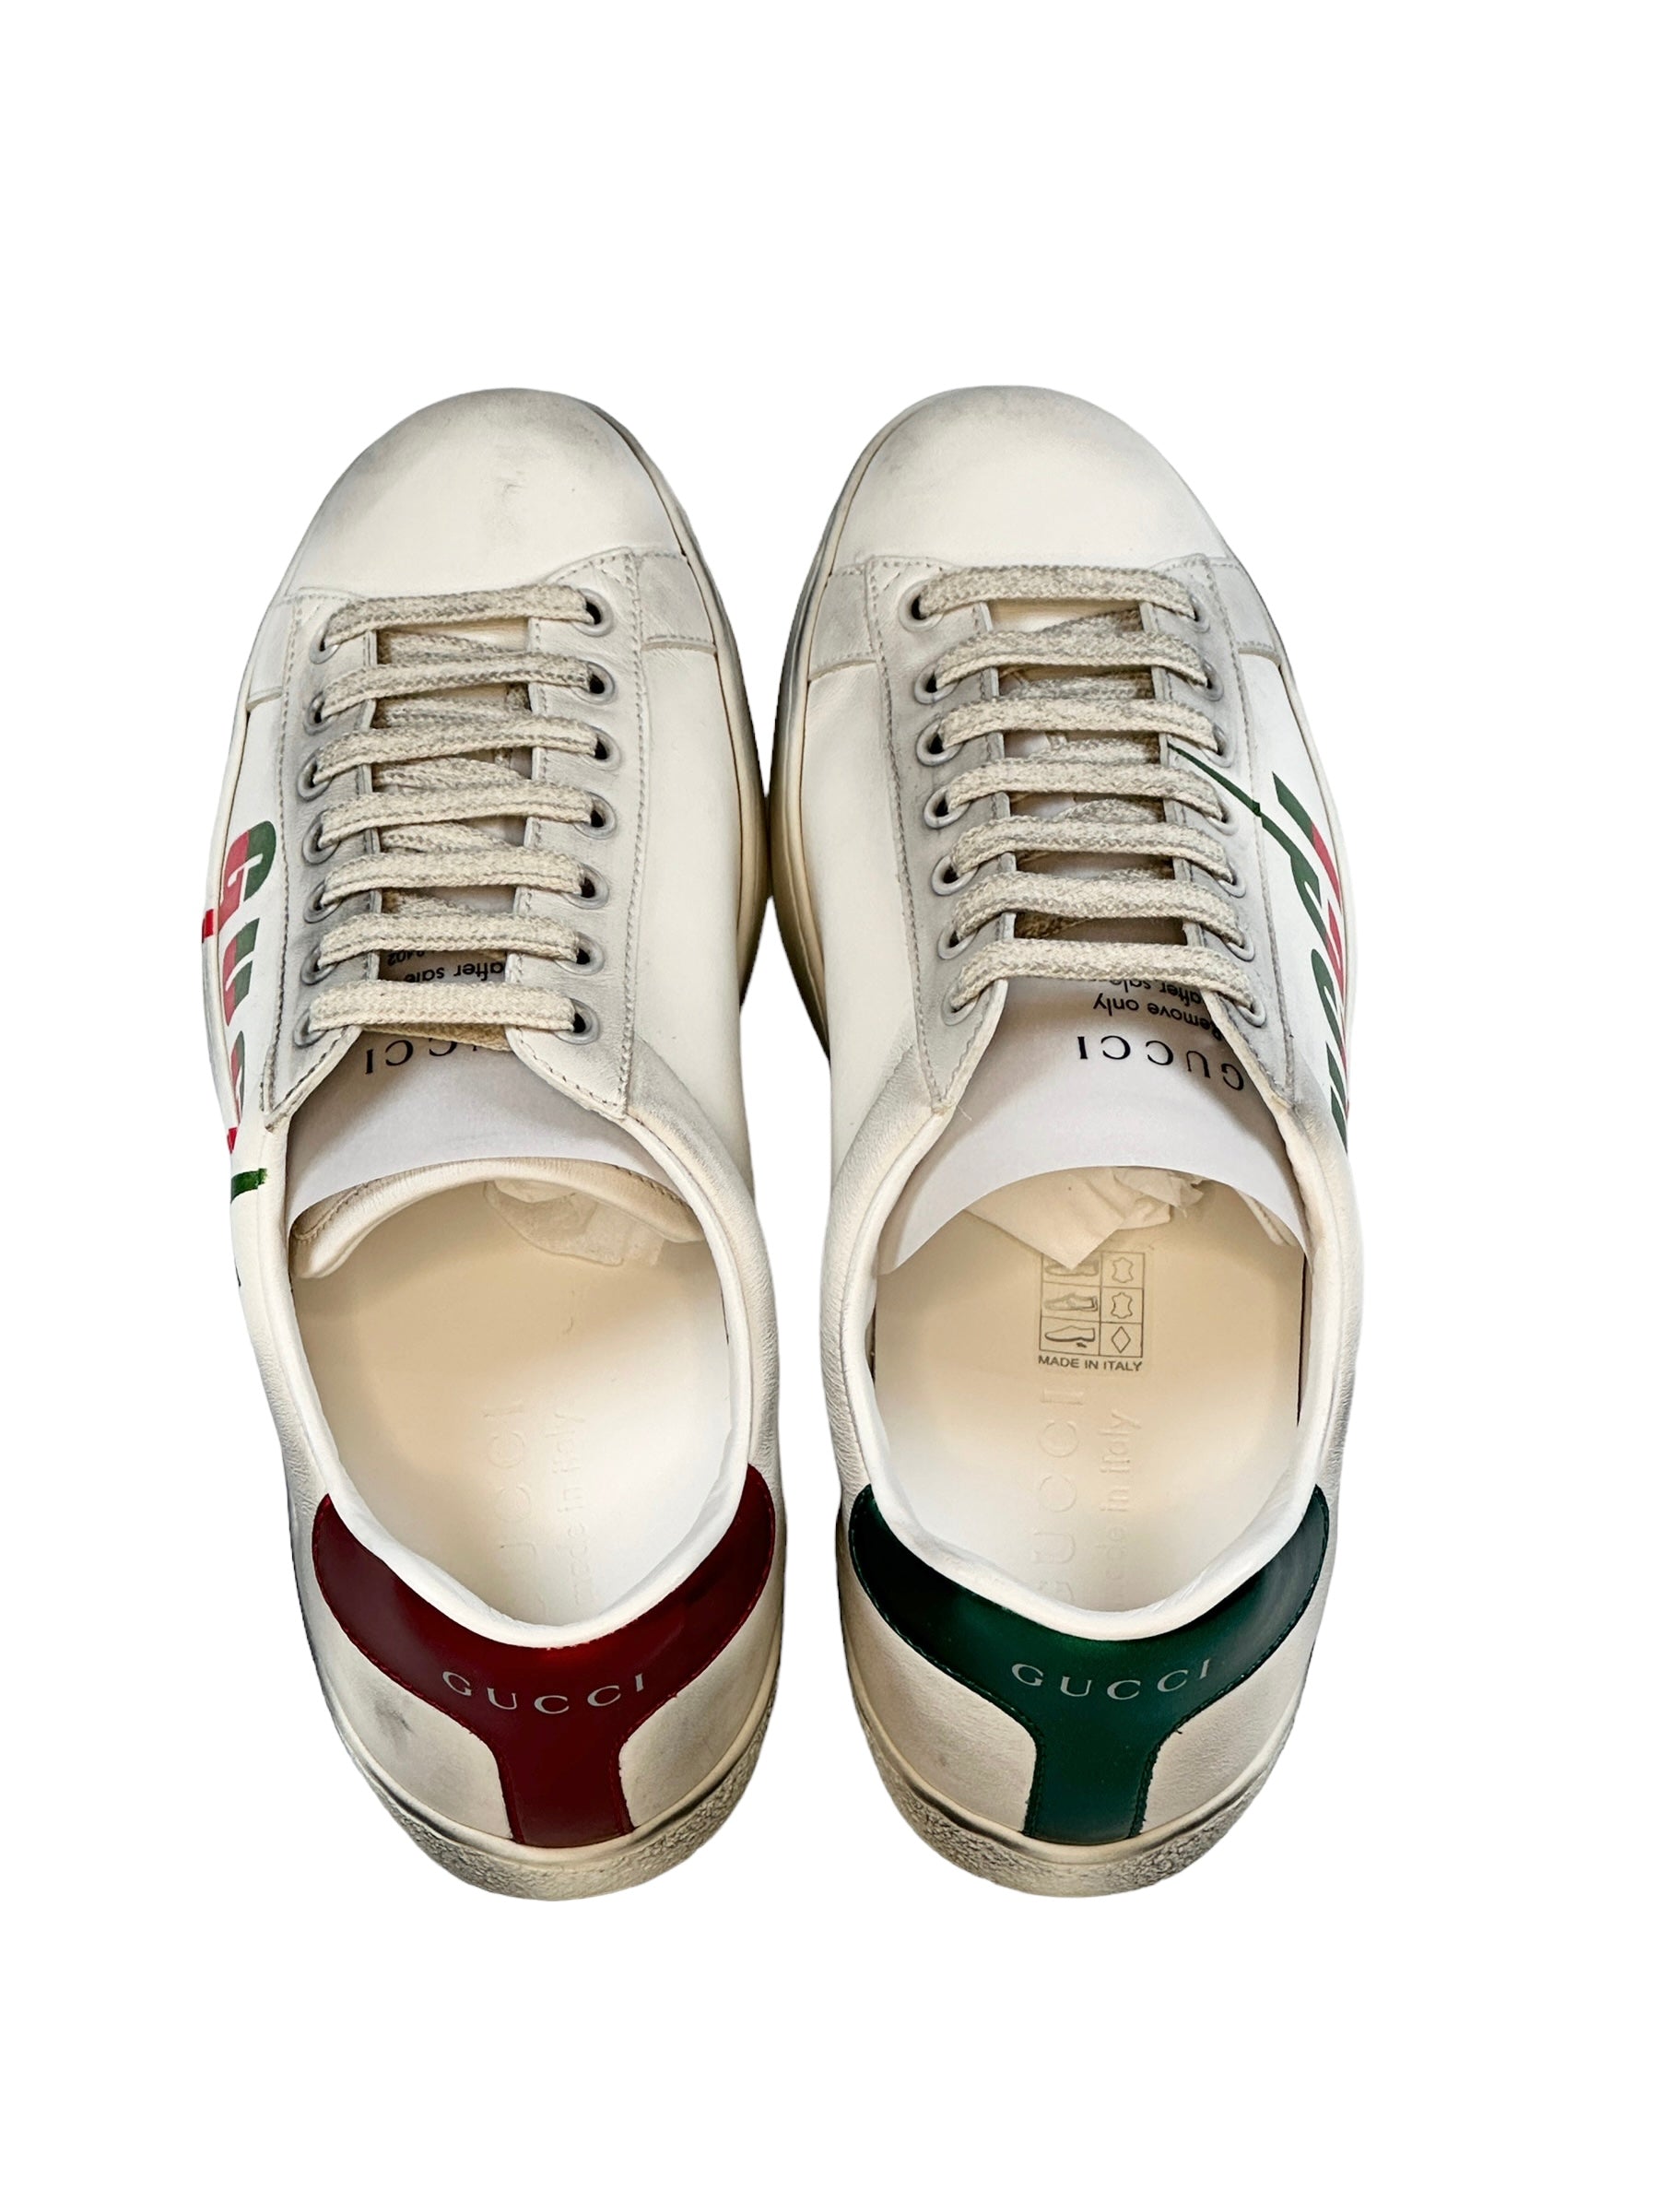 GUCCI Miro Soft Distressed Nappa Sneakers / White/Red